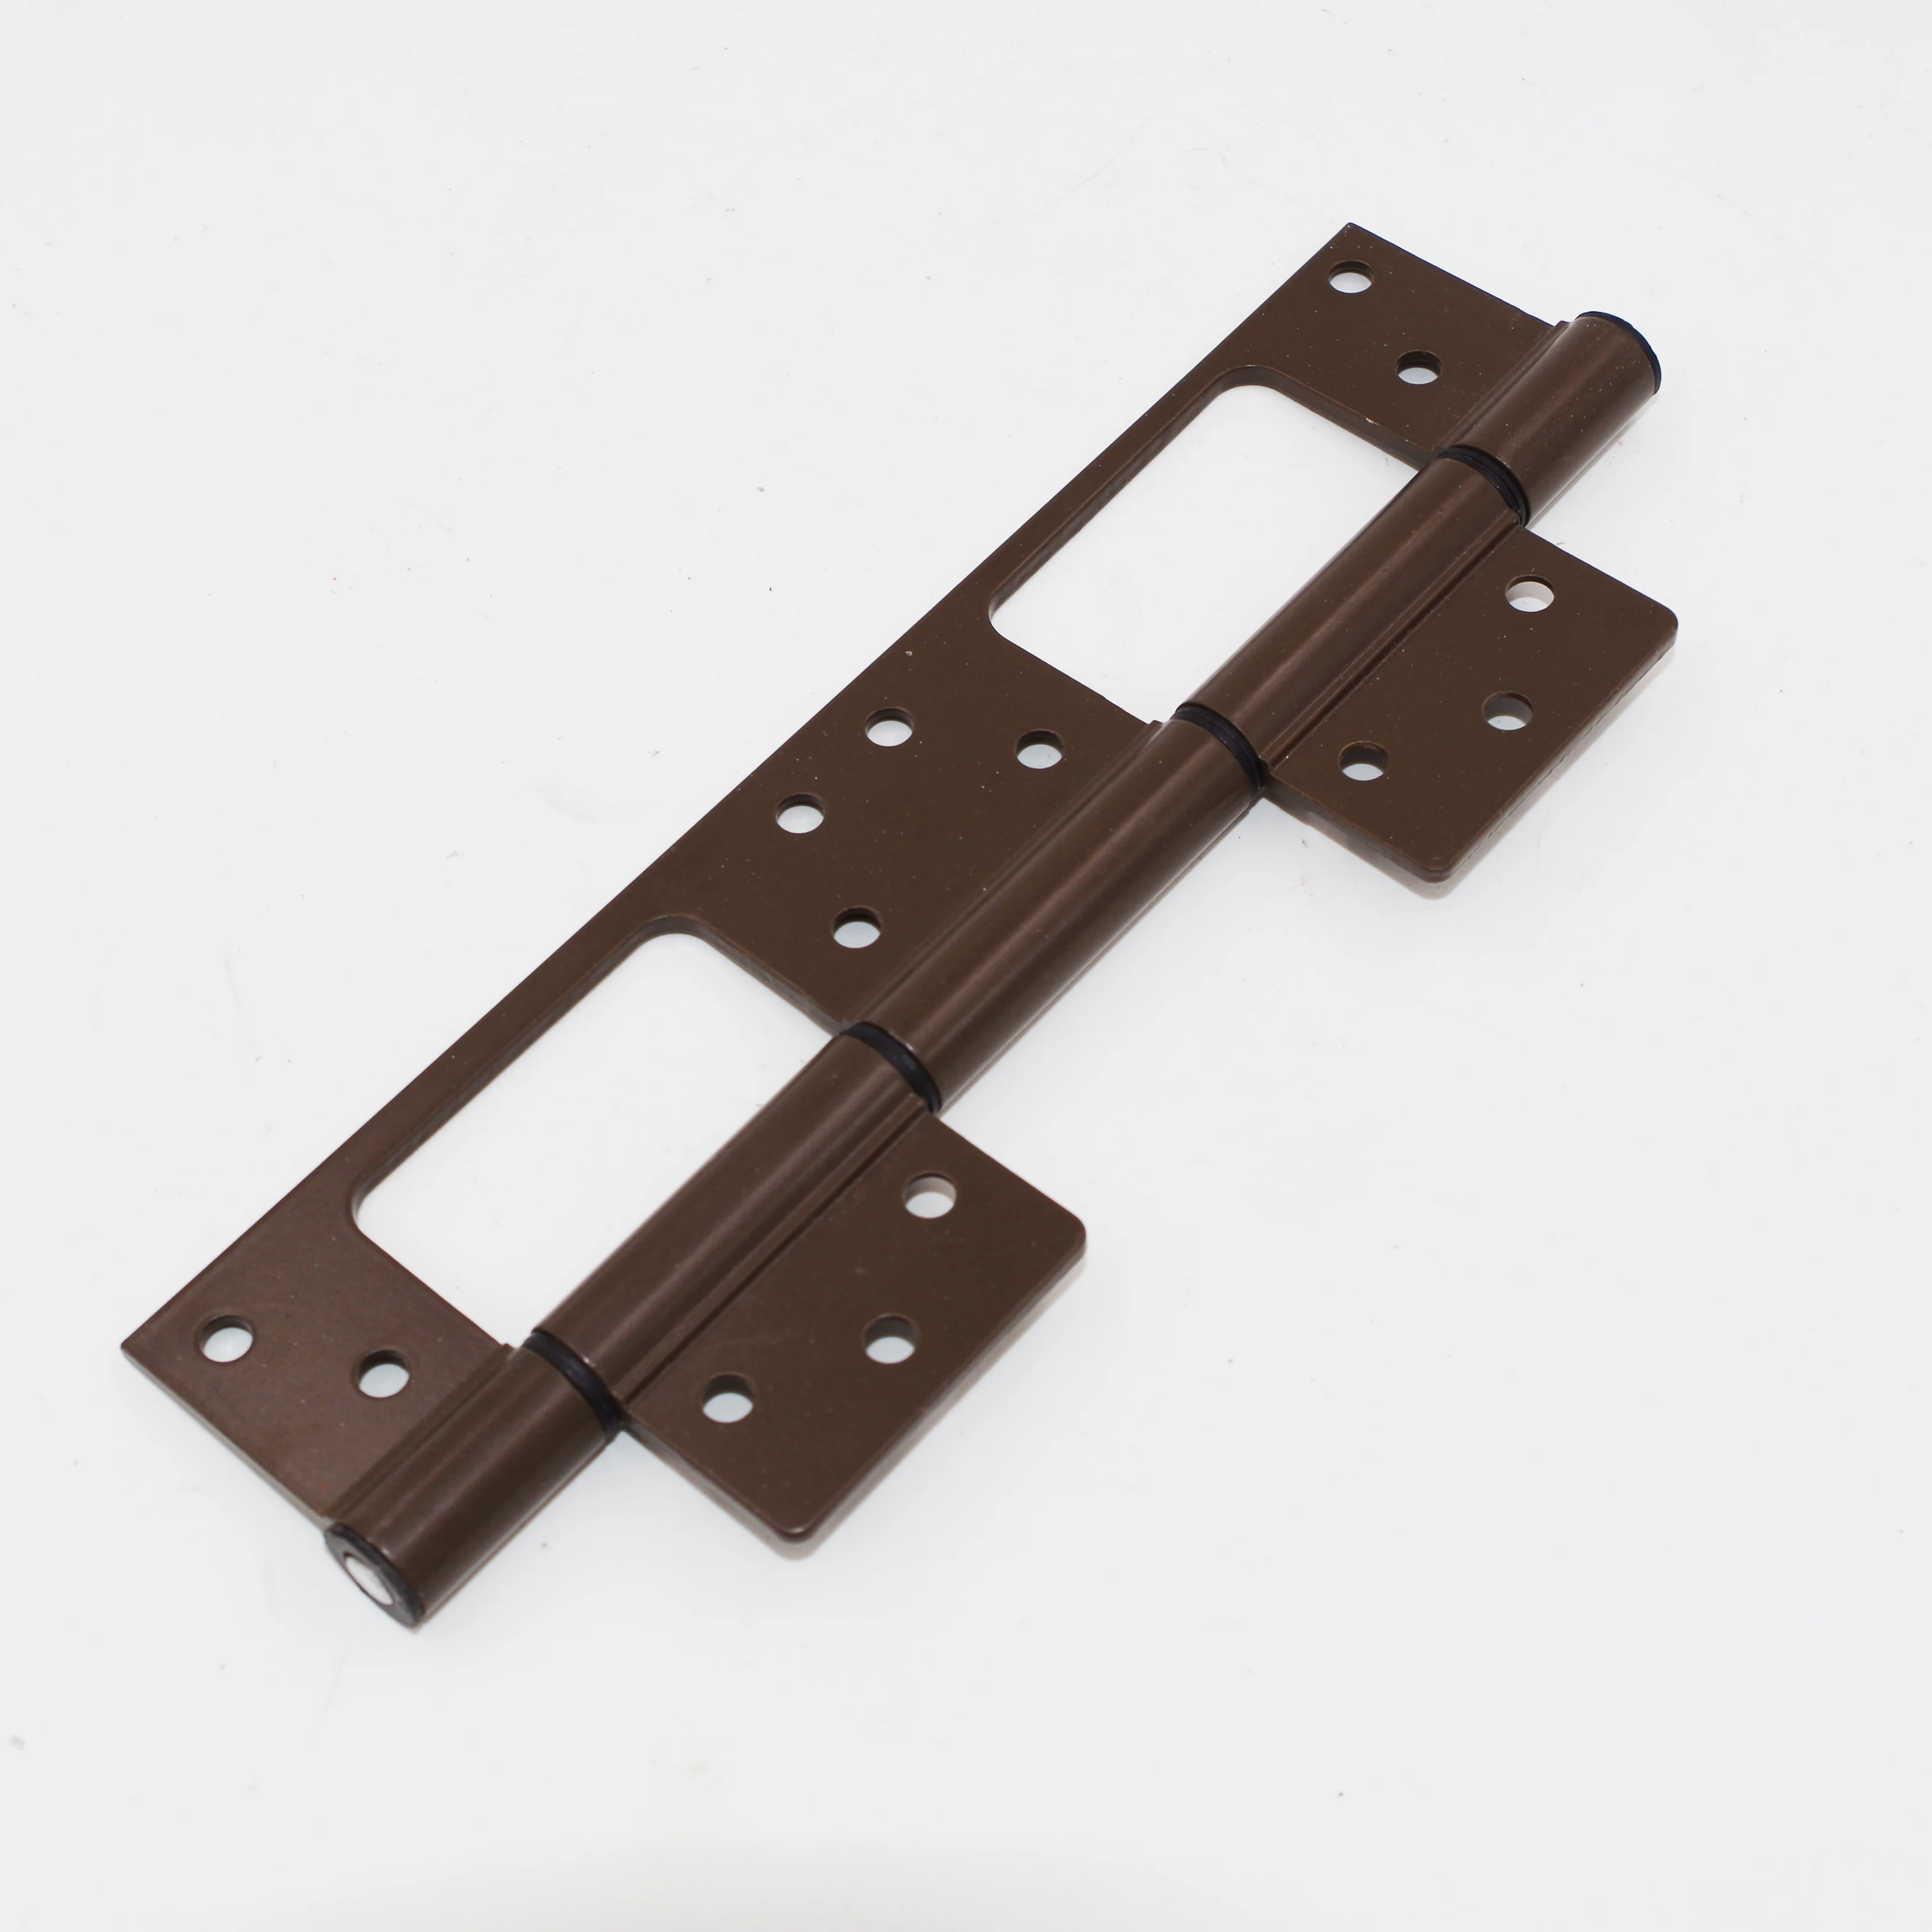 South Africa Hot Sell Aluminum Black Window and Door Hinge